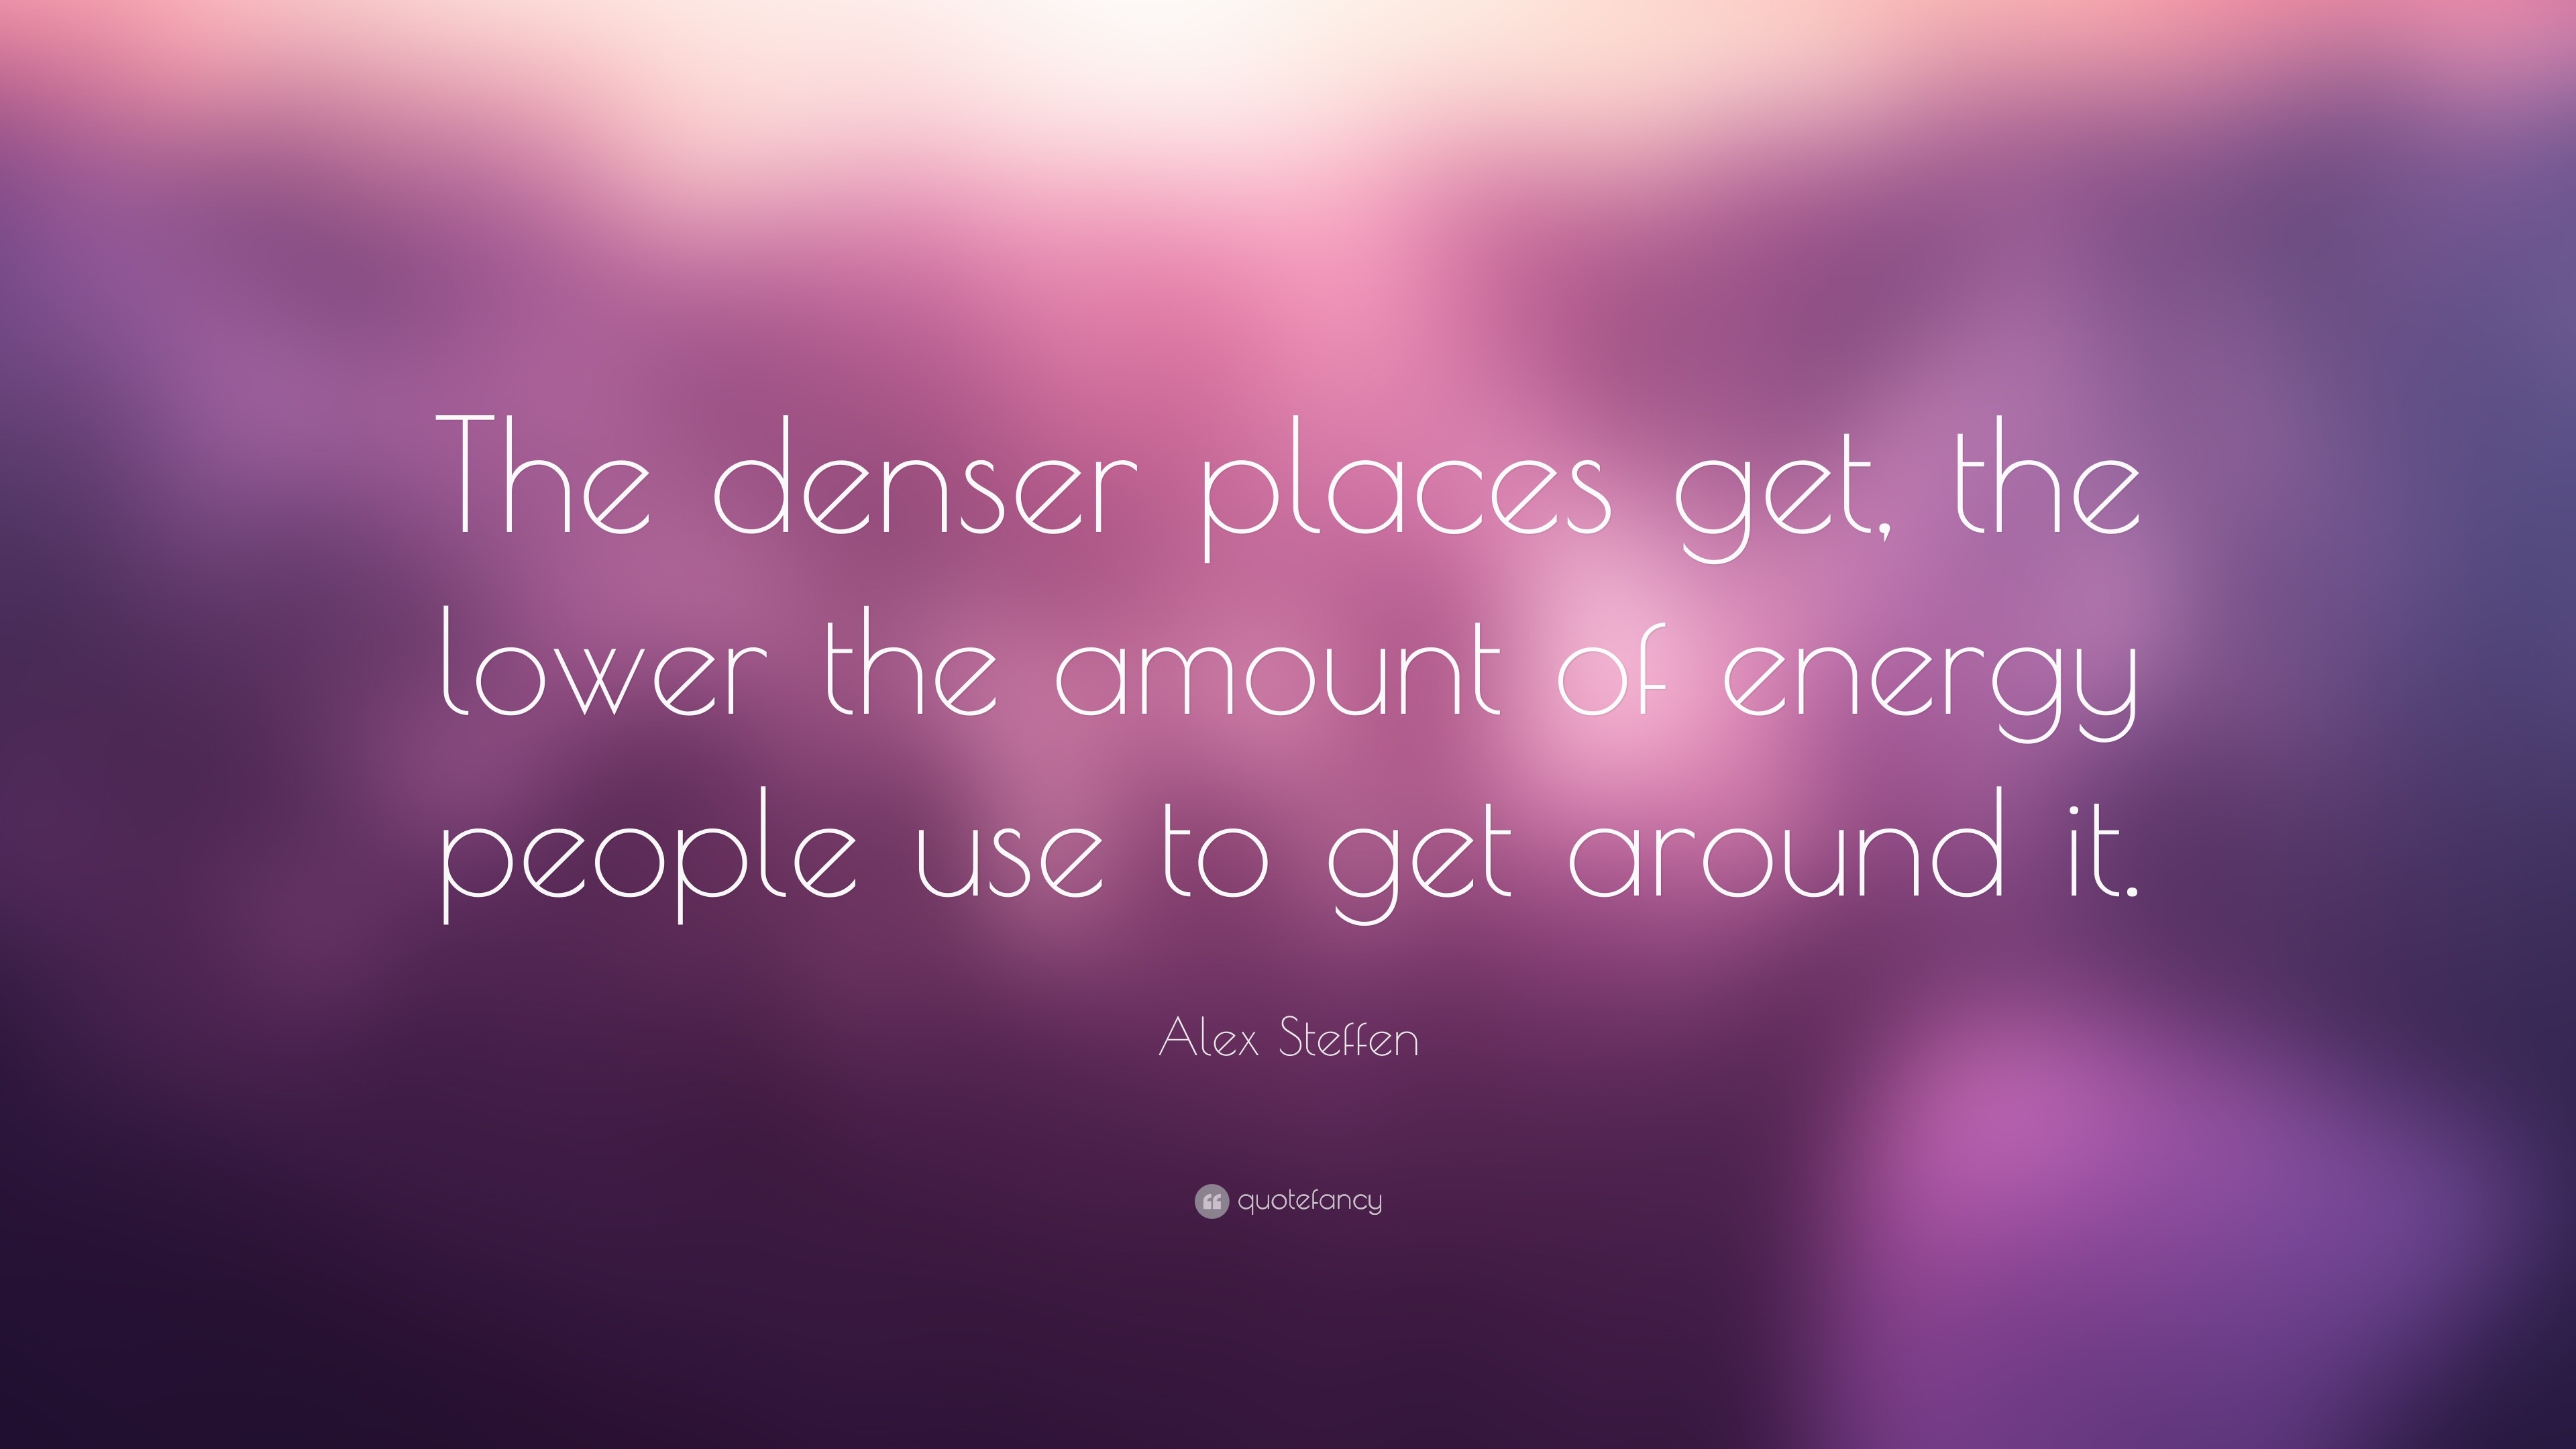 https://quotefancy.com/media/wallpaper/3840x2160/1105085-Alex-Steffen-Quote-The-denser-places-get-the-lower-the-amount-of.jpg